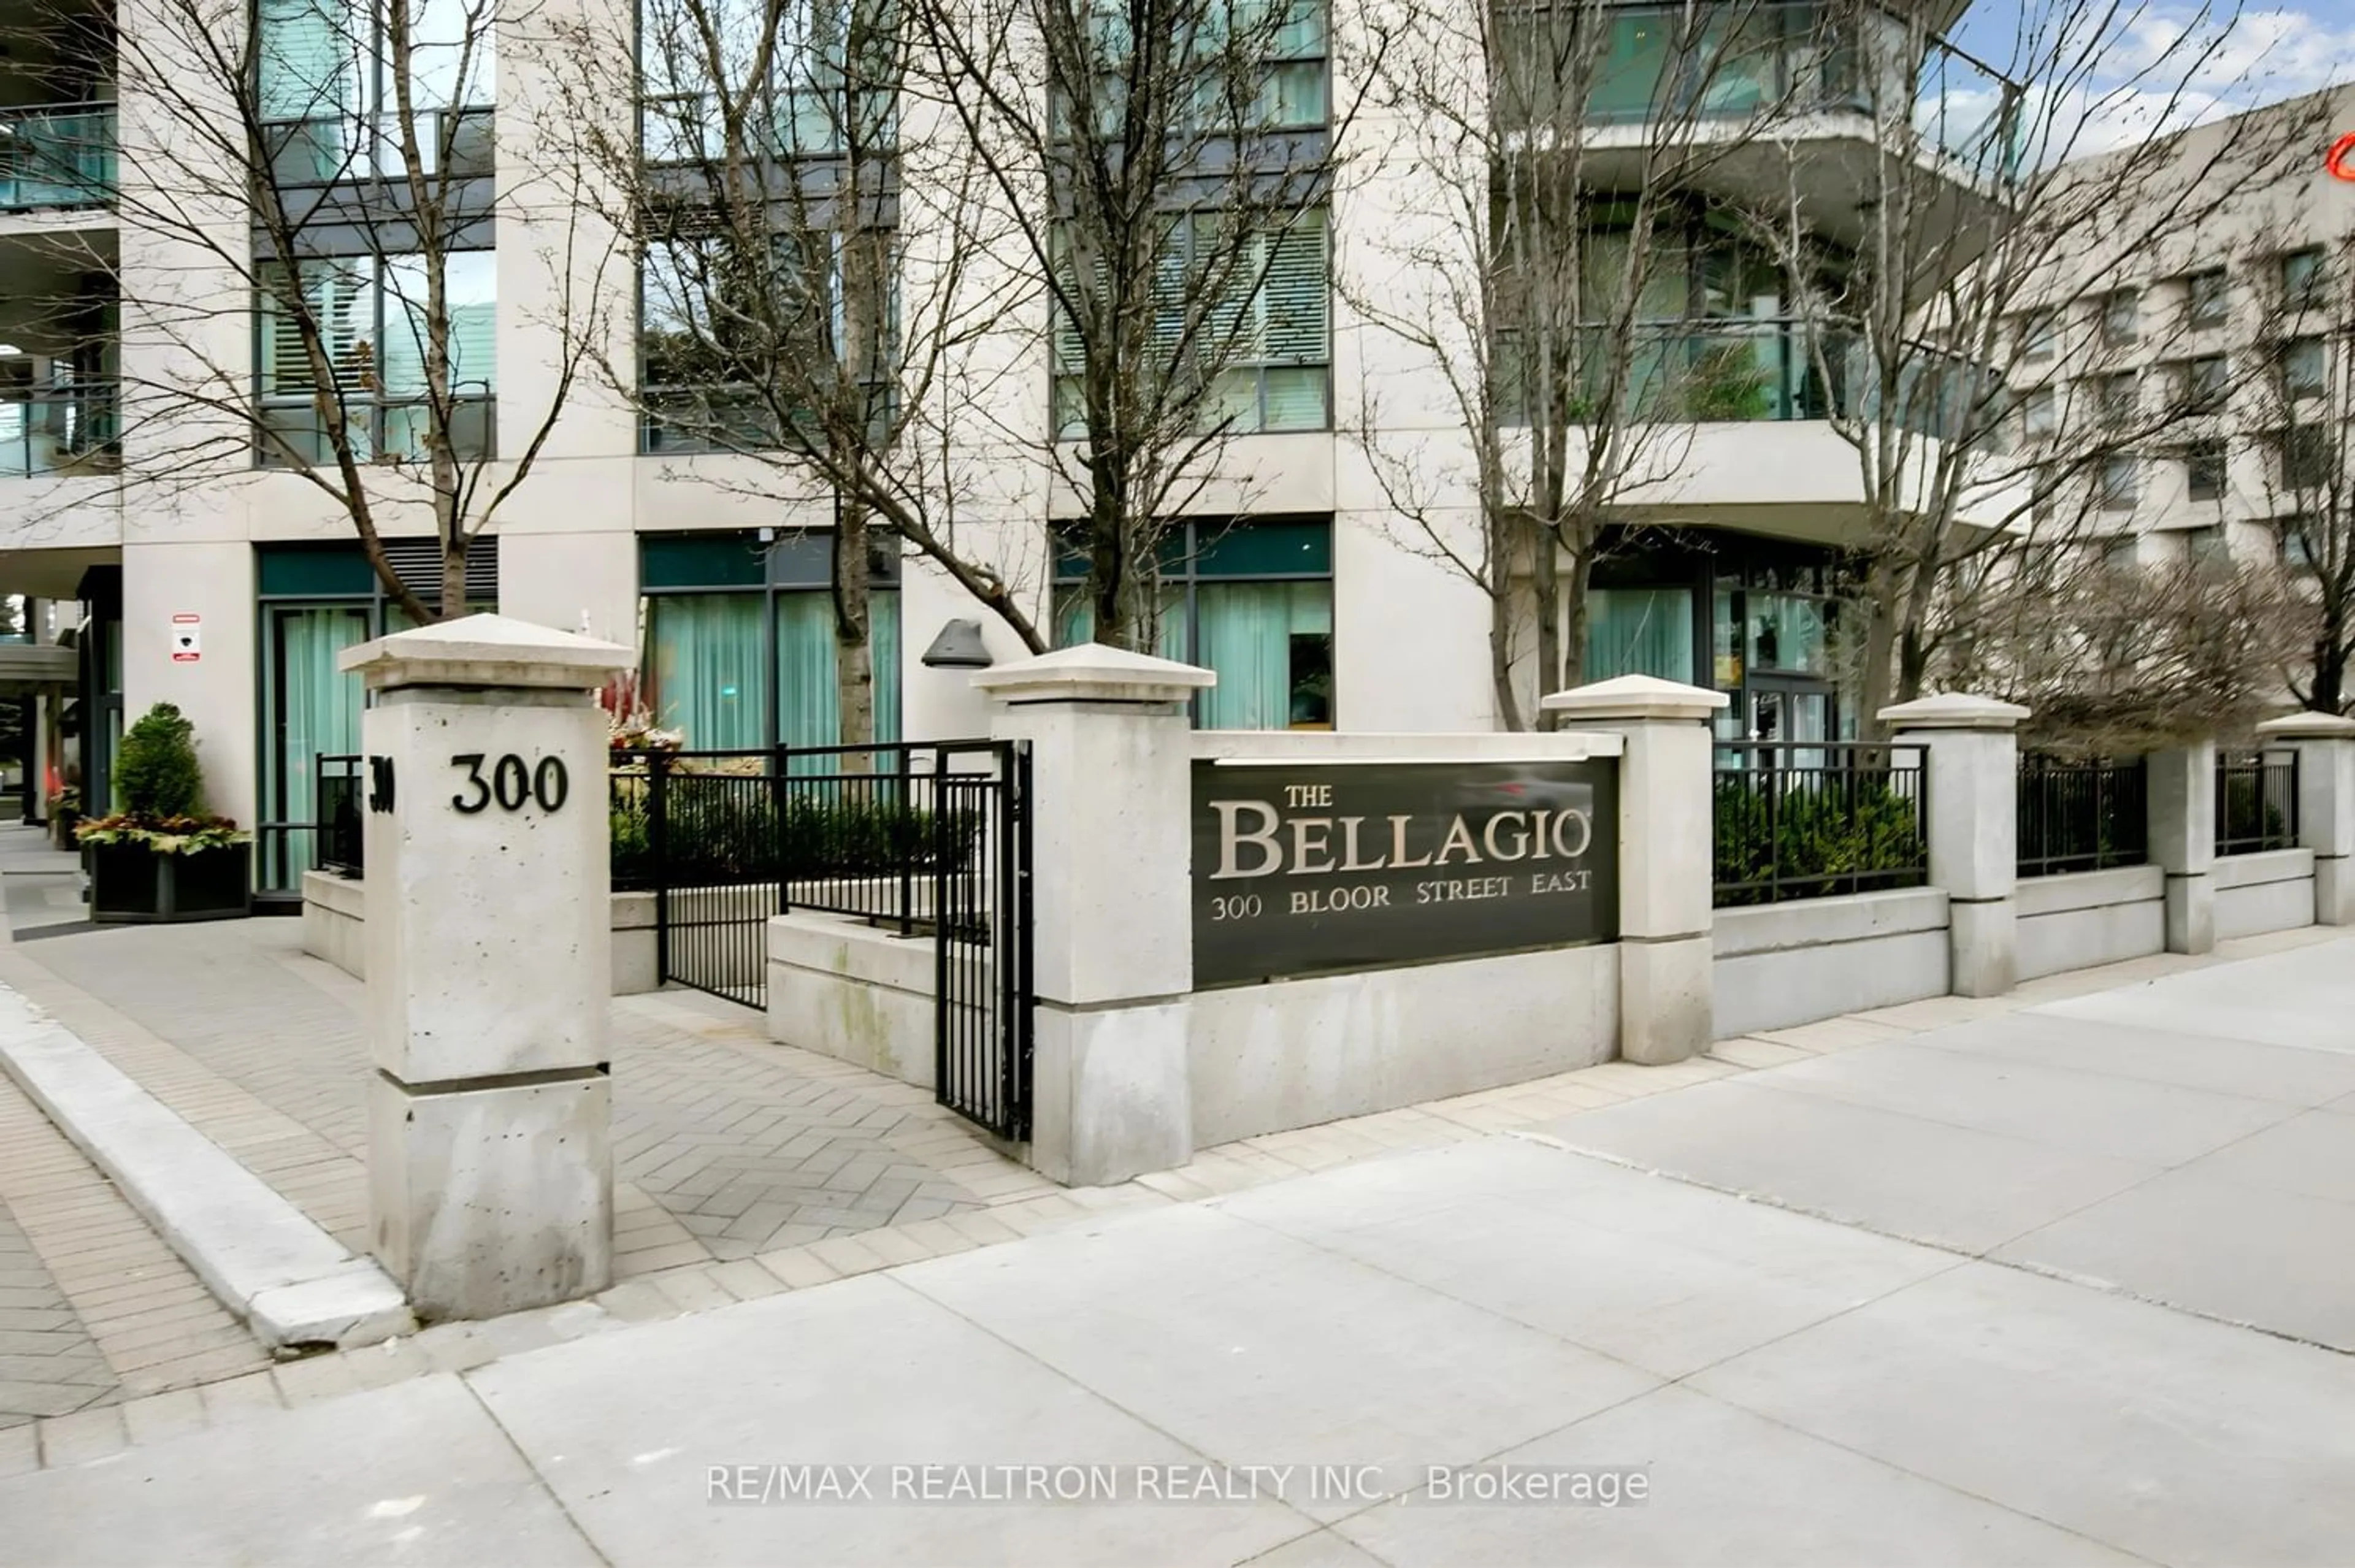 A pic from exterior of the house or condo for 300 Bloor St #1107, Toronto Ontario M4W 3Y2